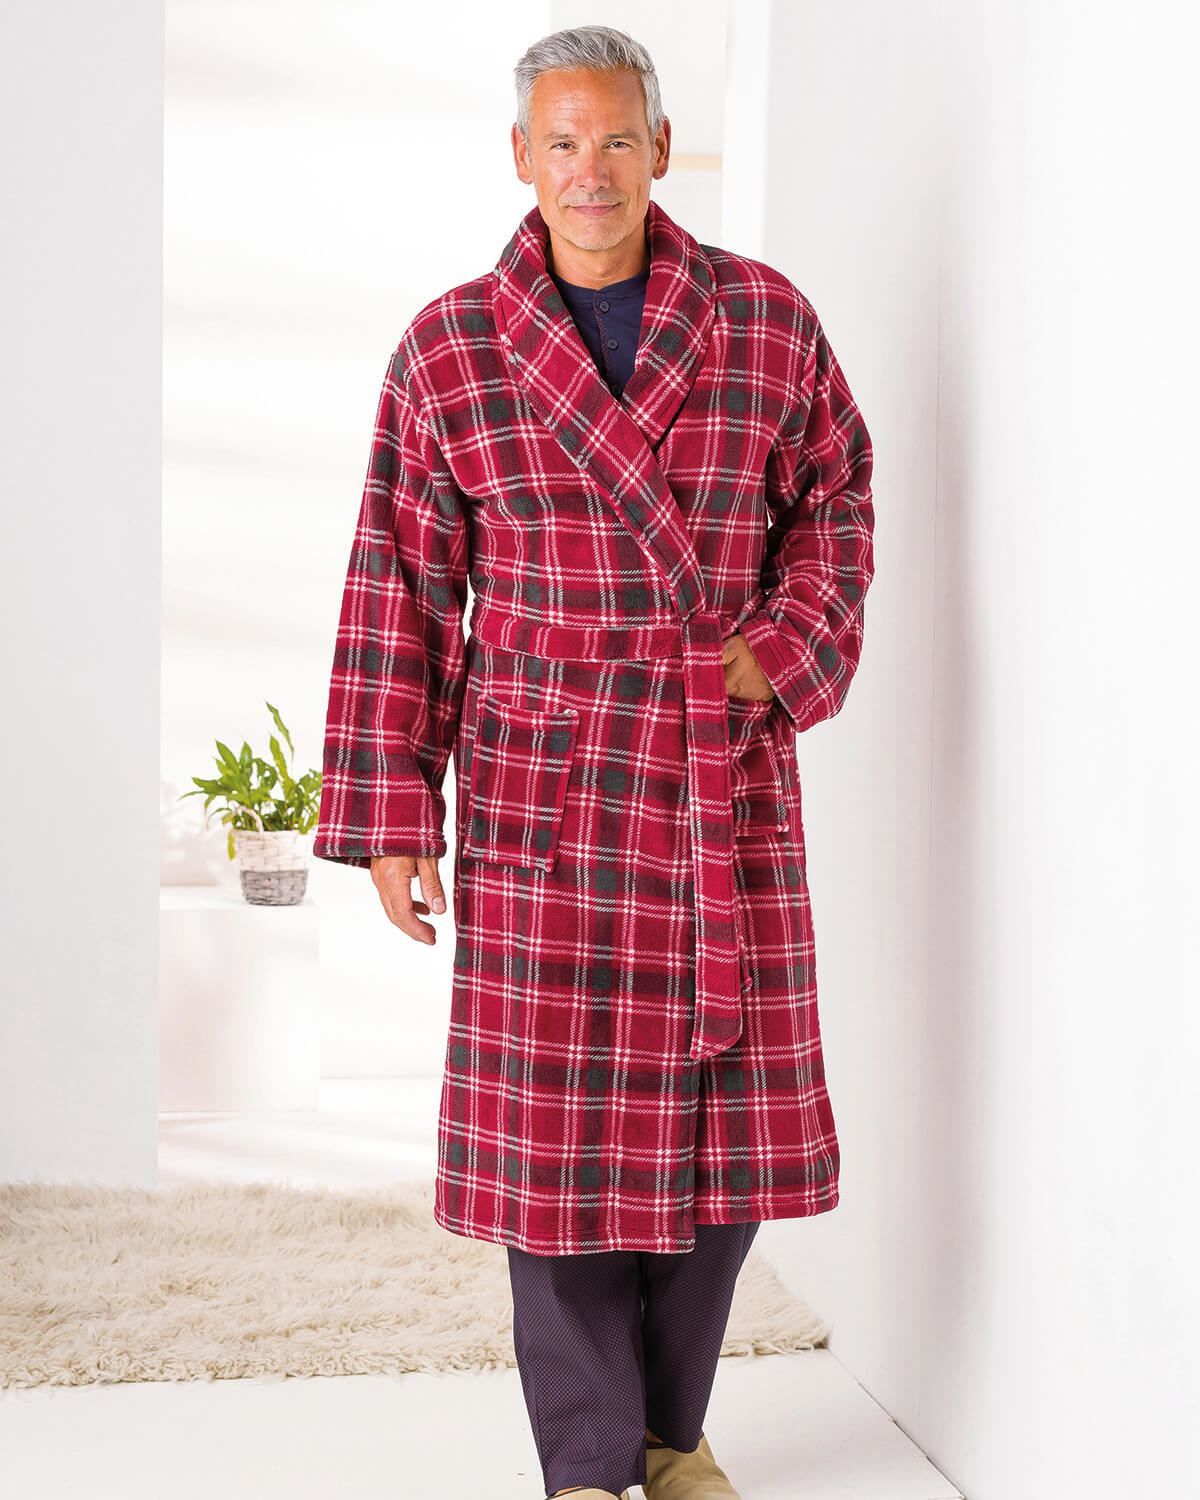 Men's Fleece Dressing Gown, Mens Checked Dressing Gown.